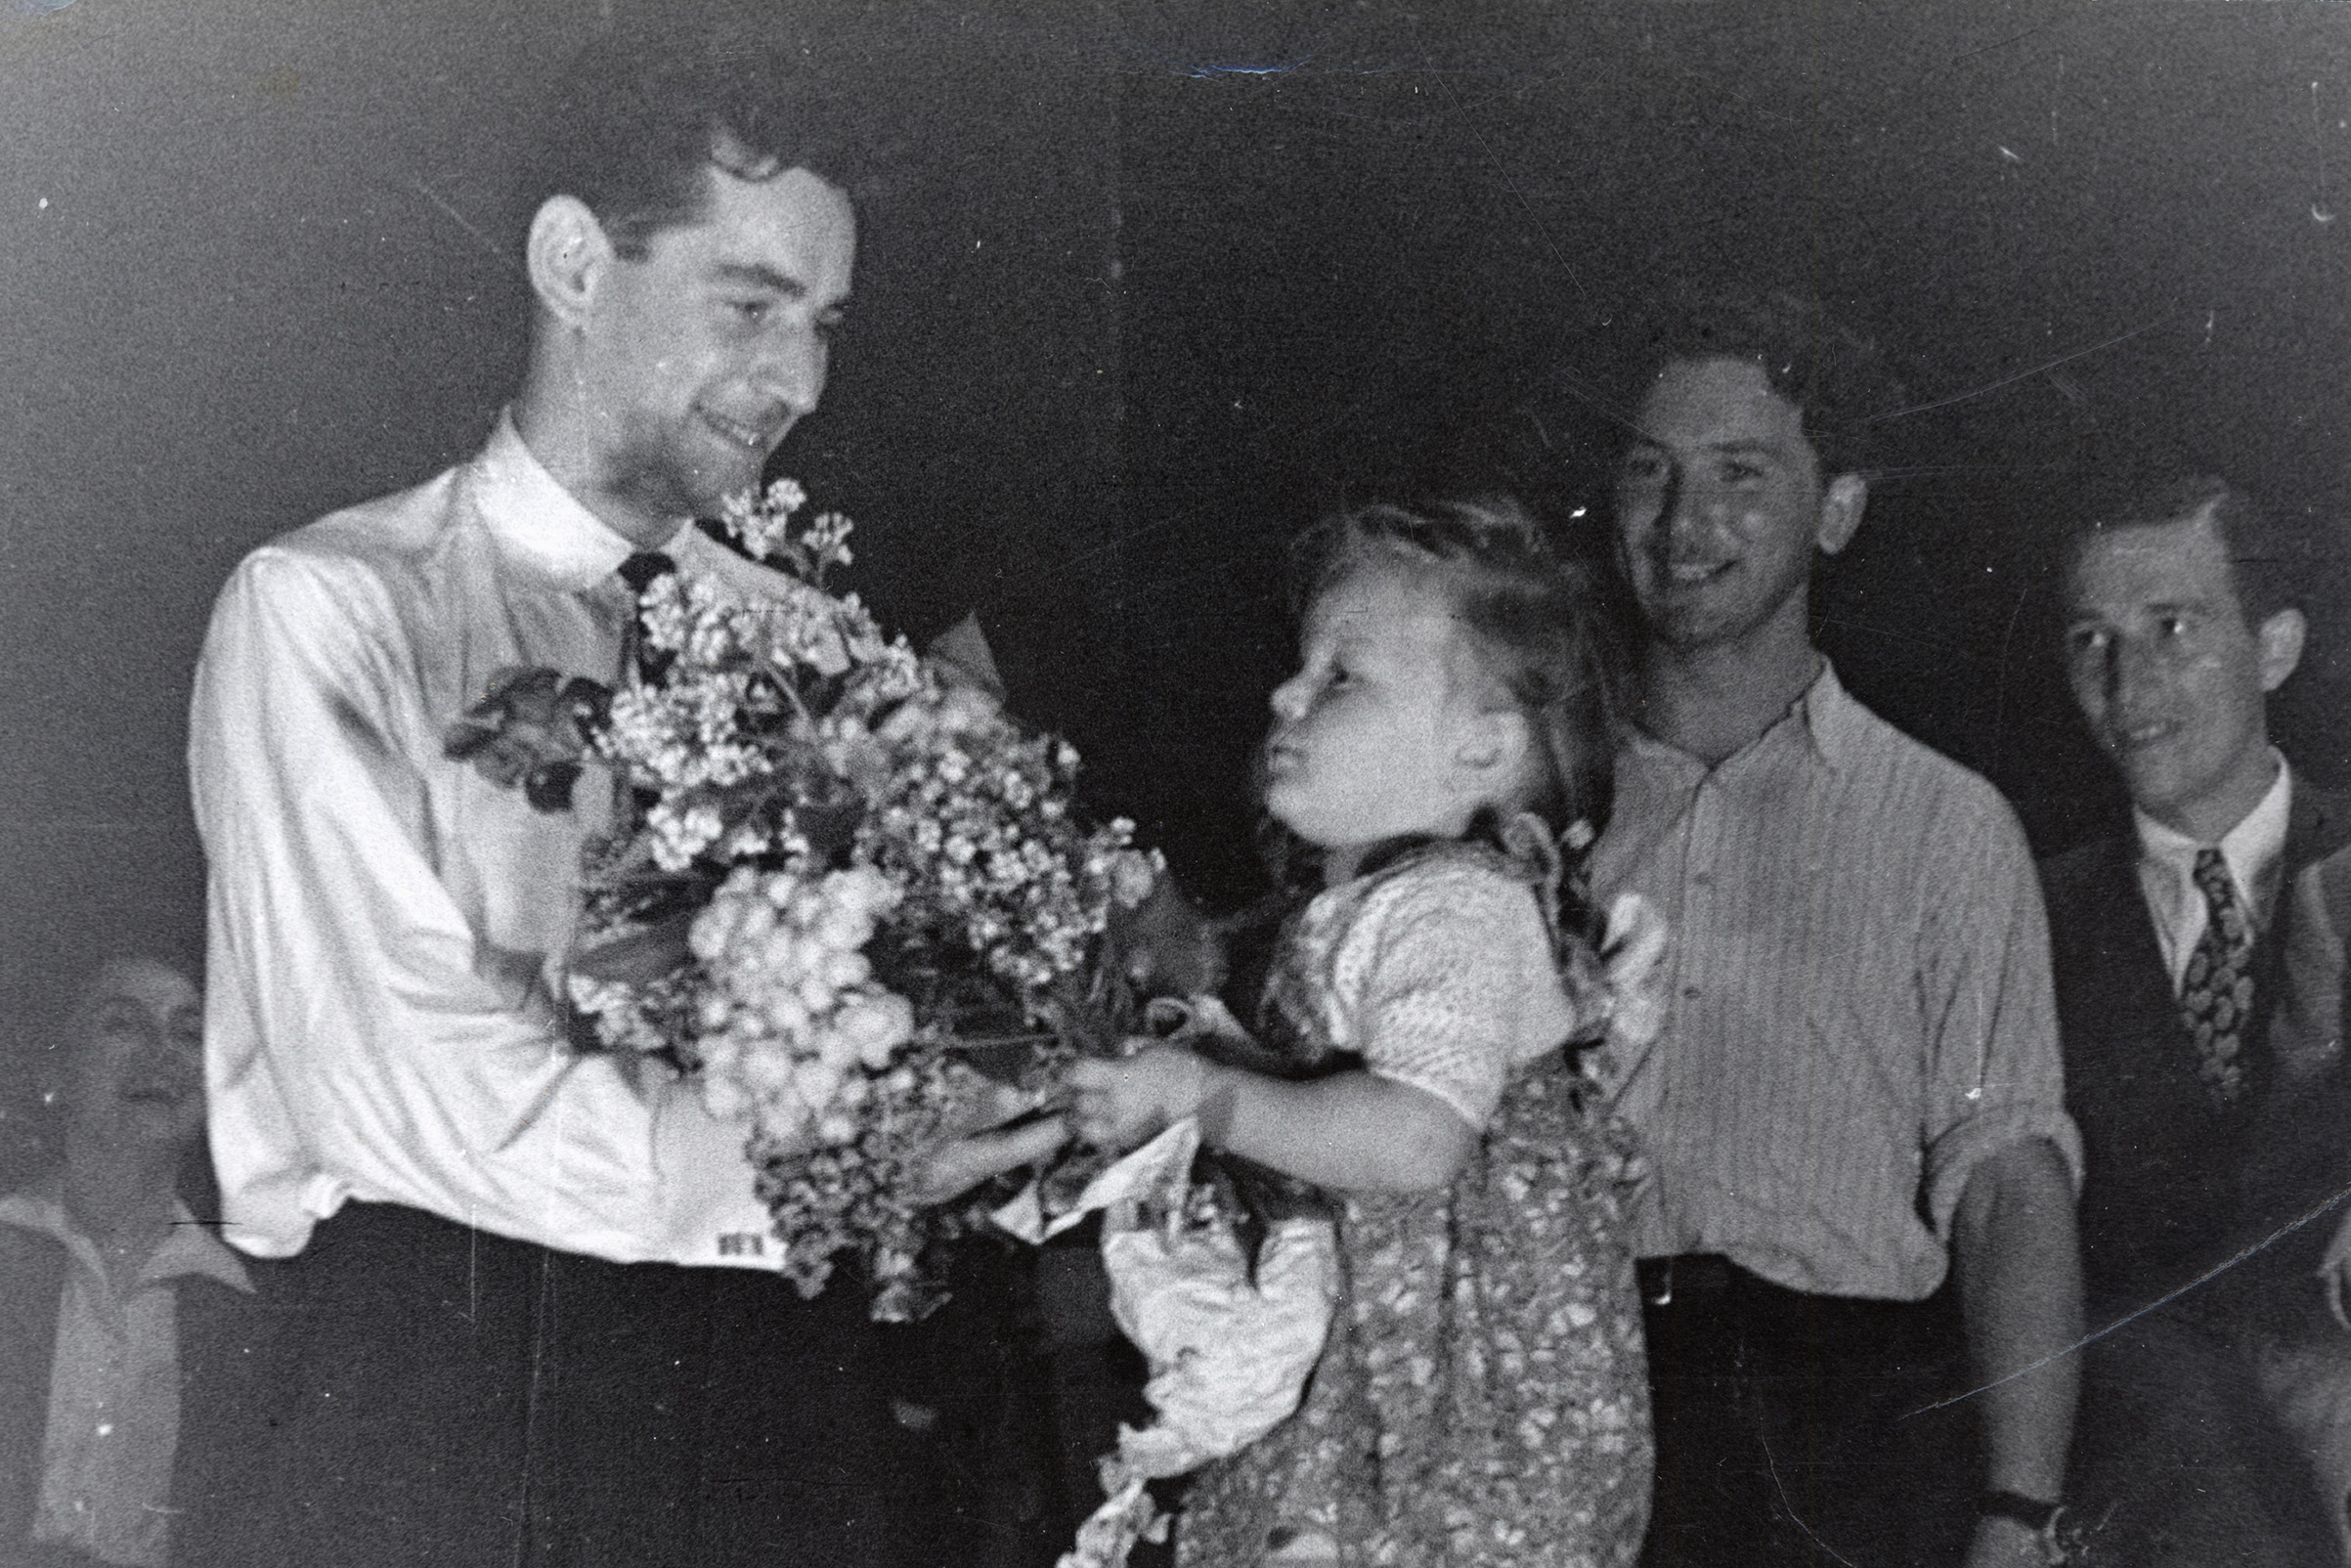 Leonard Bernstein receives flowers from an admirer after conducting an orchestra of concentration camp survivors for a concert sponsored by the American Jewish Joint Distribution Committee on May 10, 1948, outside Munich. (American Jewish Joint Distribution Committee)